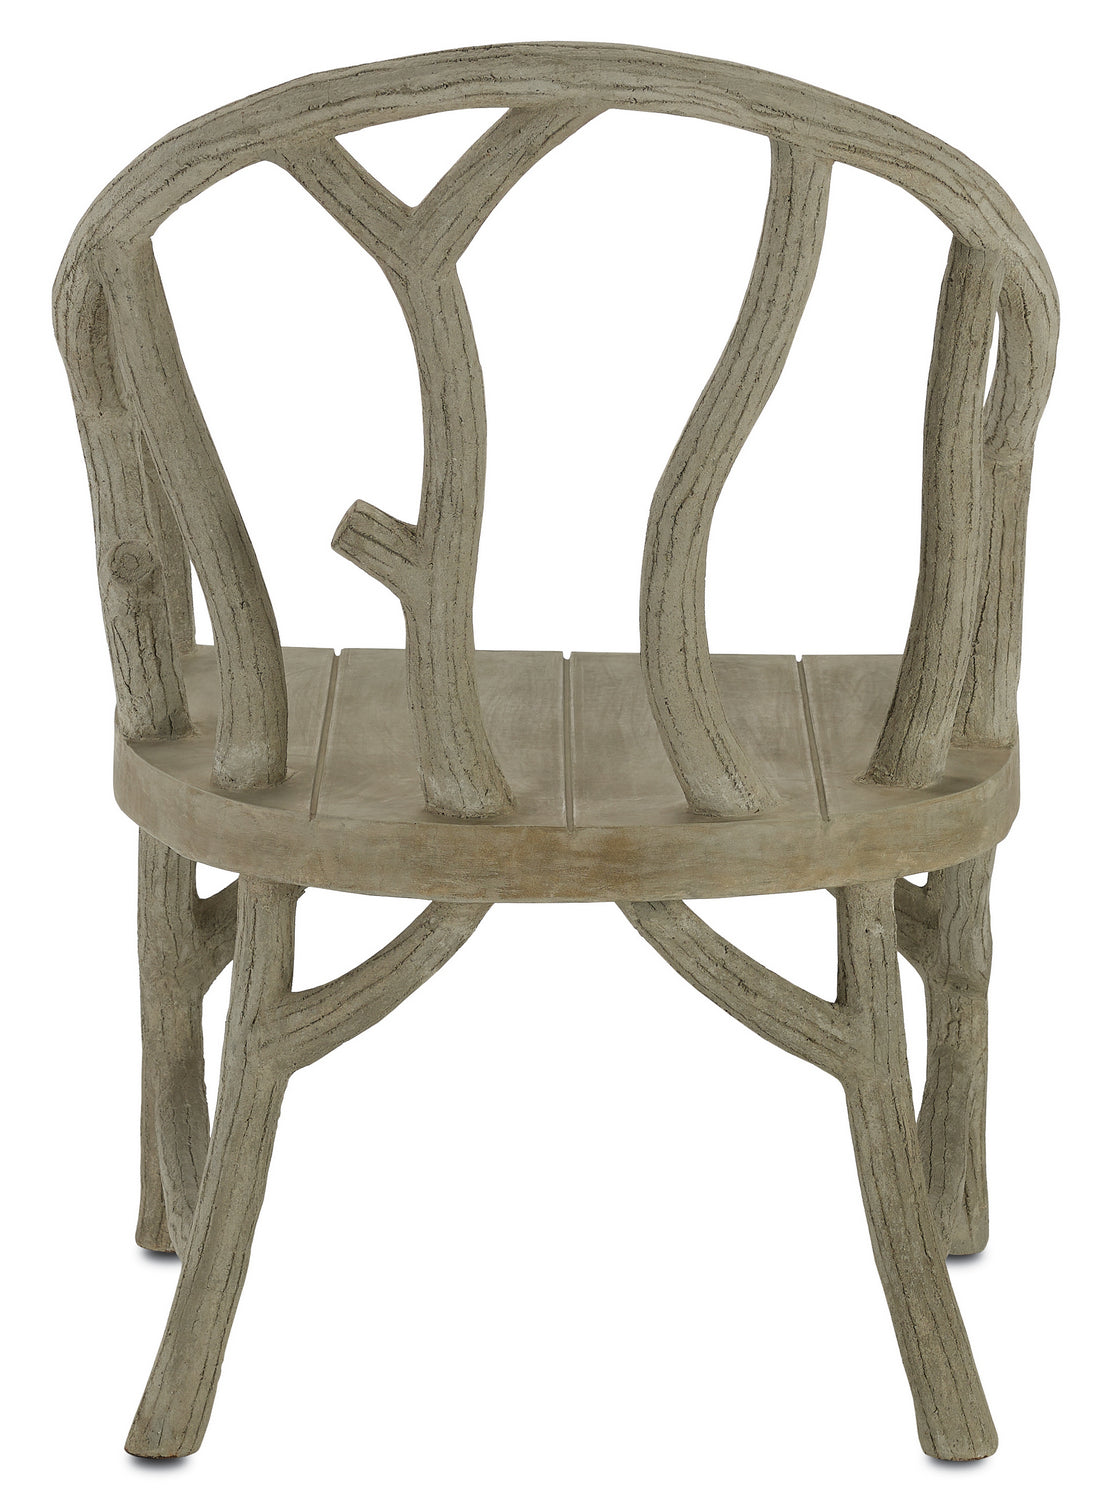 Chair from the Arbor collection in Portland/Faux Bois finish